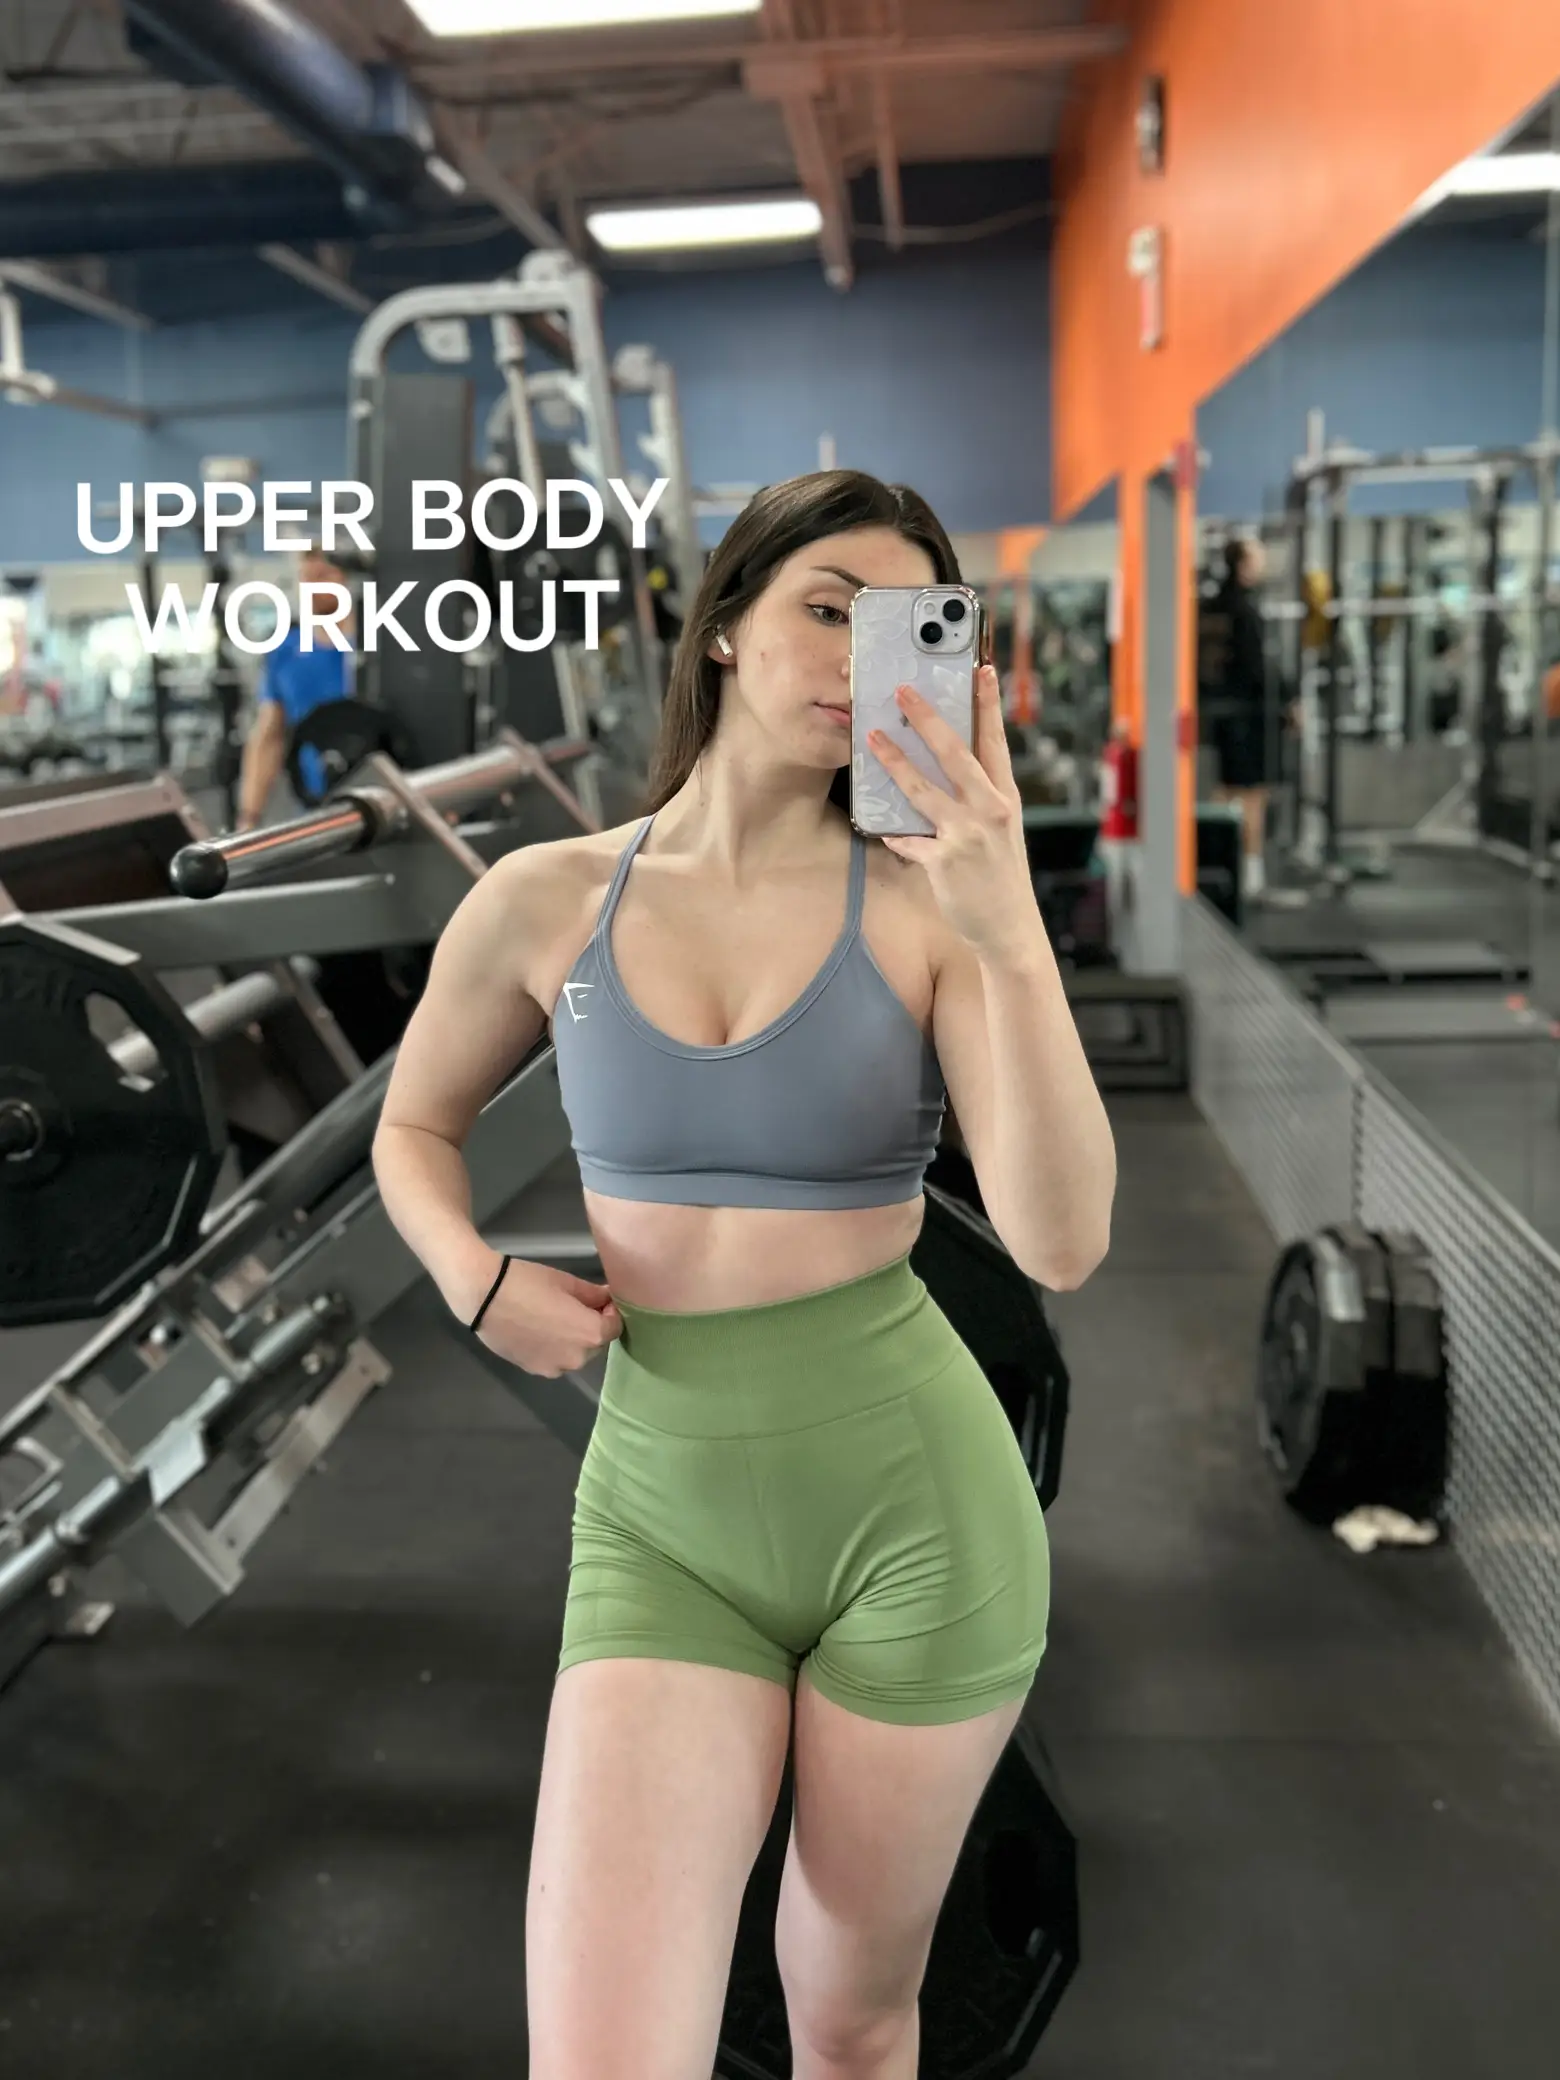 ⚡️ INTENSE Upper Body Workout For Women  4 Workouts To Tone Arms,  Shoulders and Upper Back! 